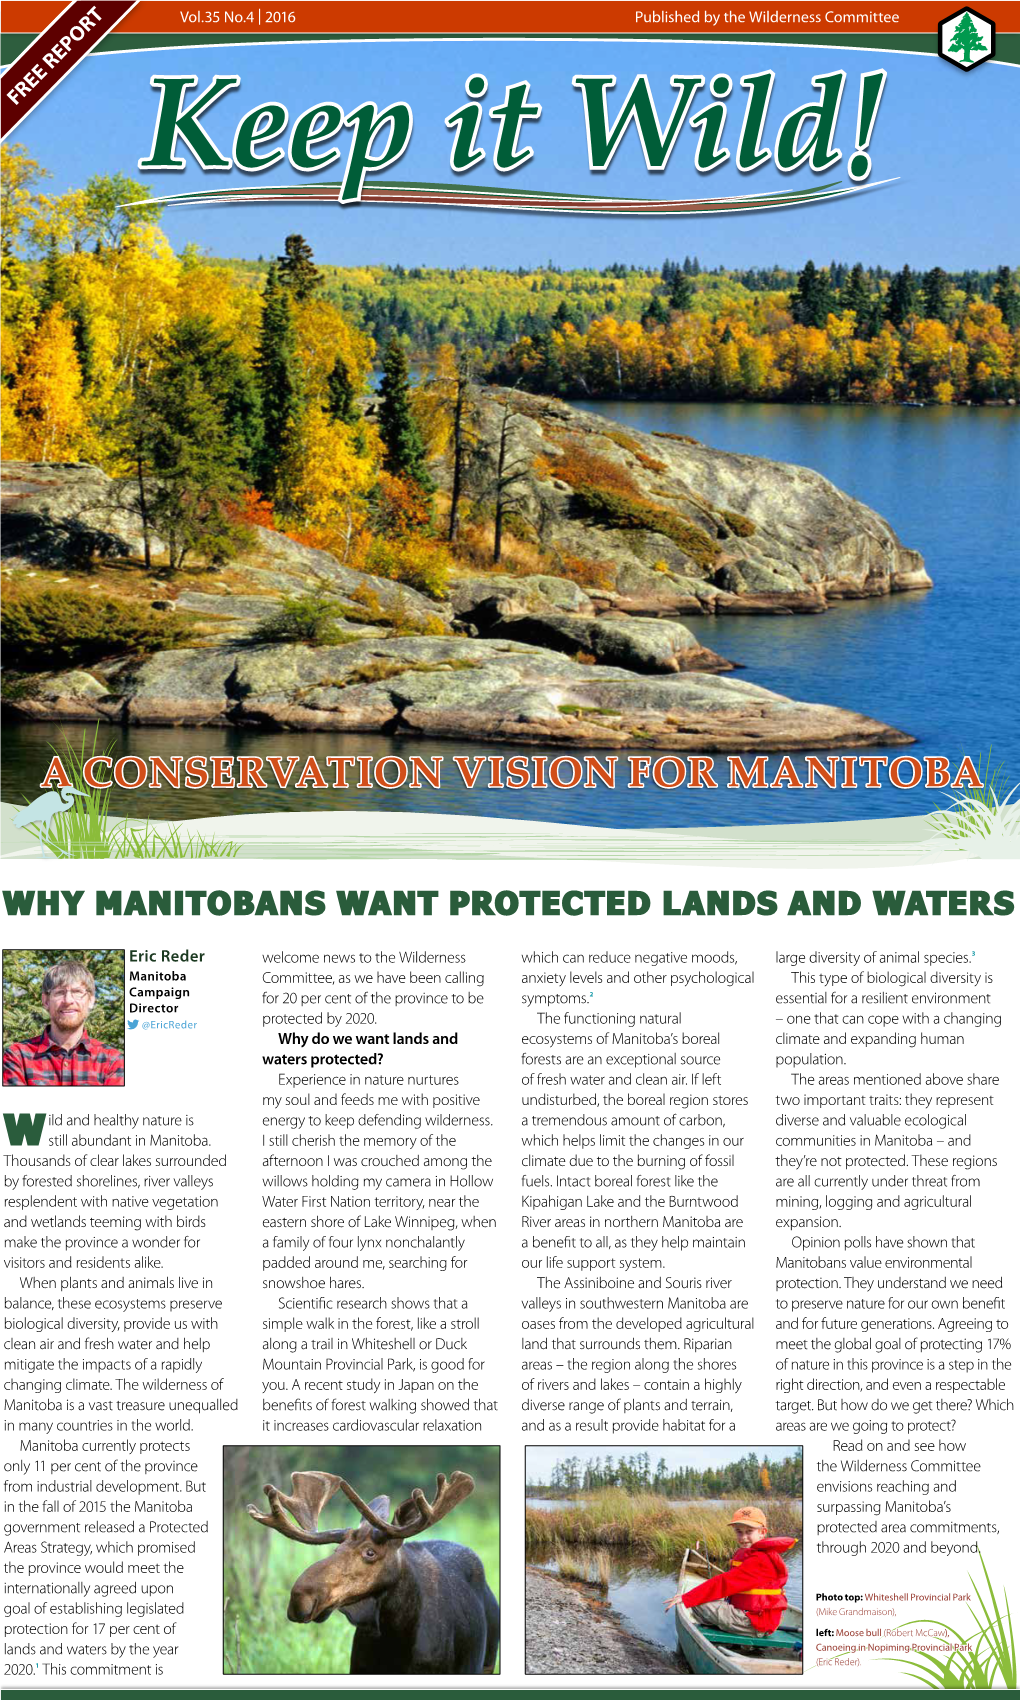 A Conservation Vision for Manitoba